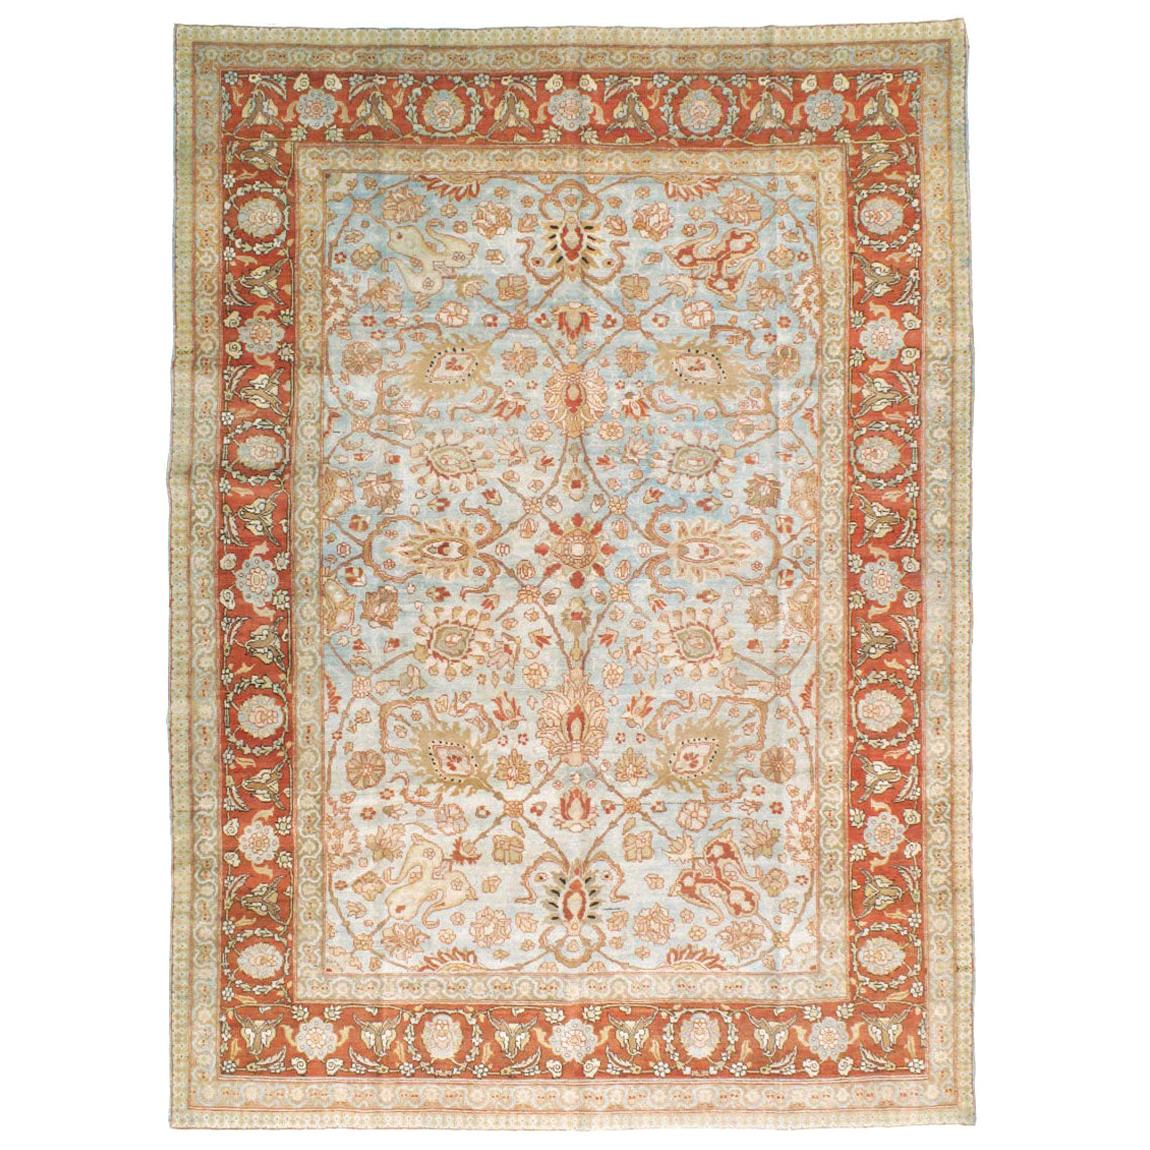 Early 20th Century Persian Tabriz Room Size Carpet in Red, Blue, and Grey